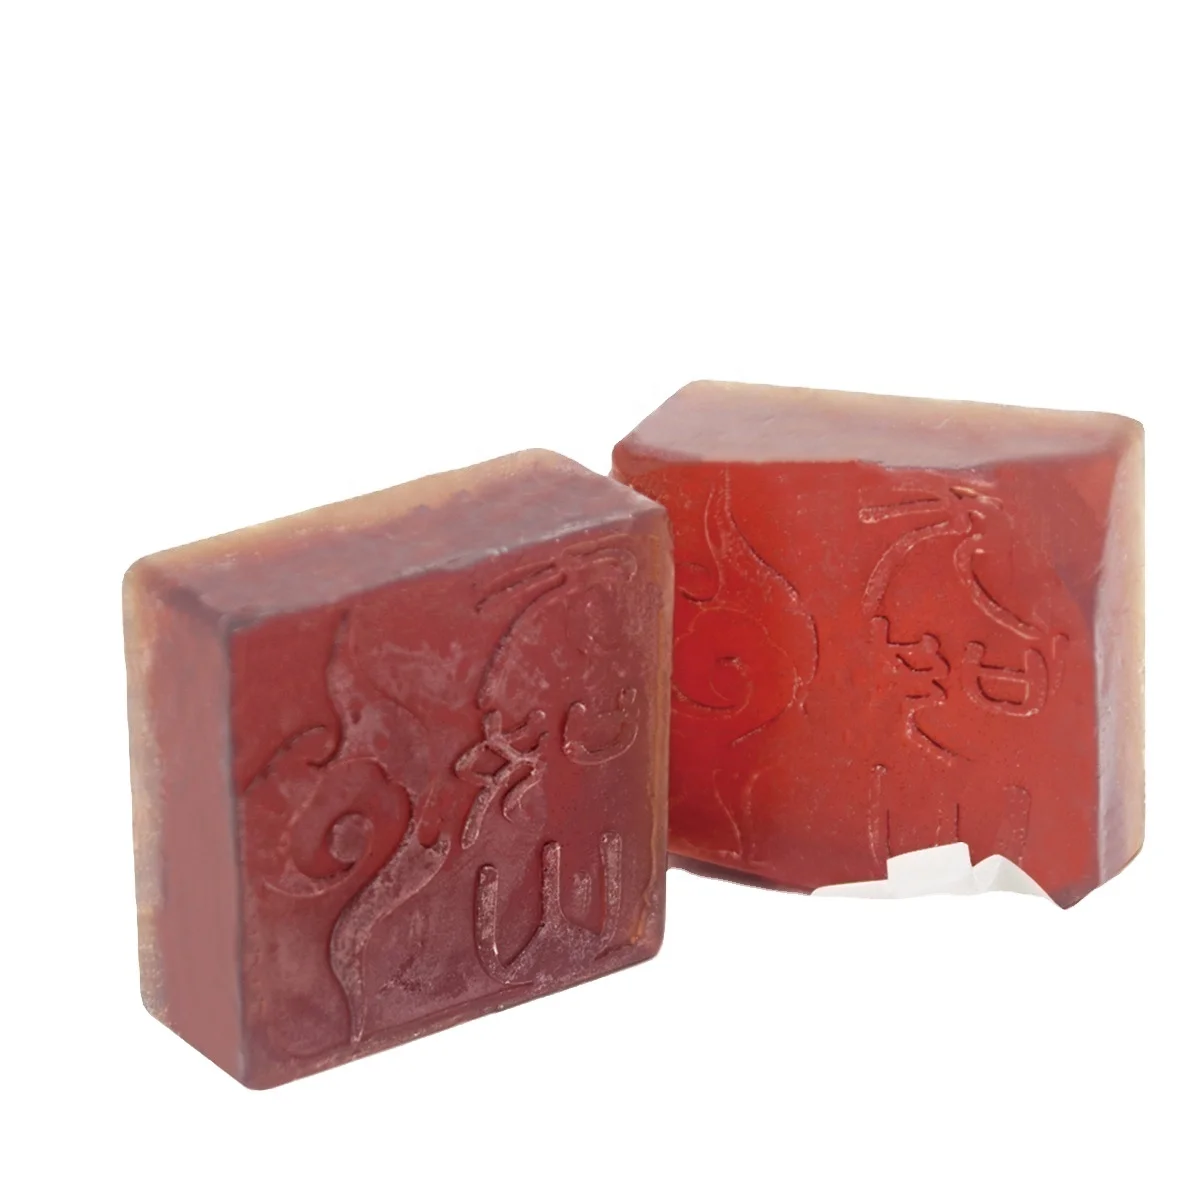 

Hand Made Premium for Acne Treatment & Blackhead Removal Brightening Exfoliating Skin Handmade Toilet Soap, Brown